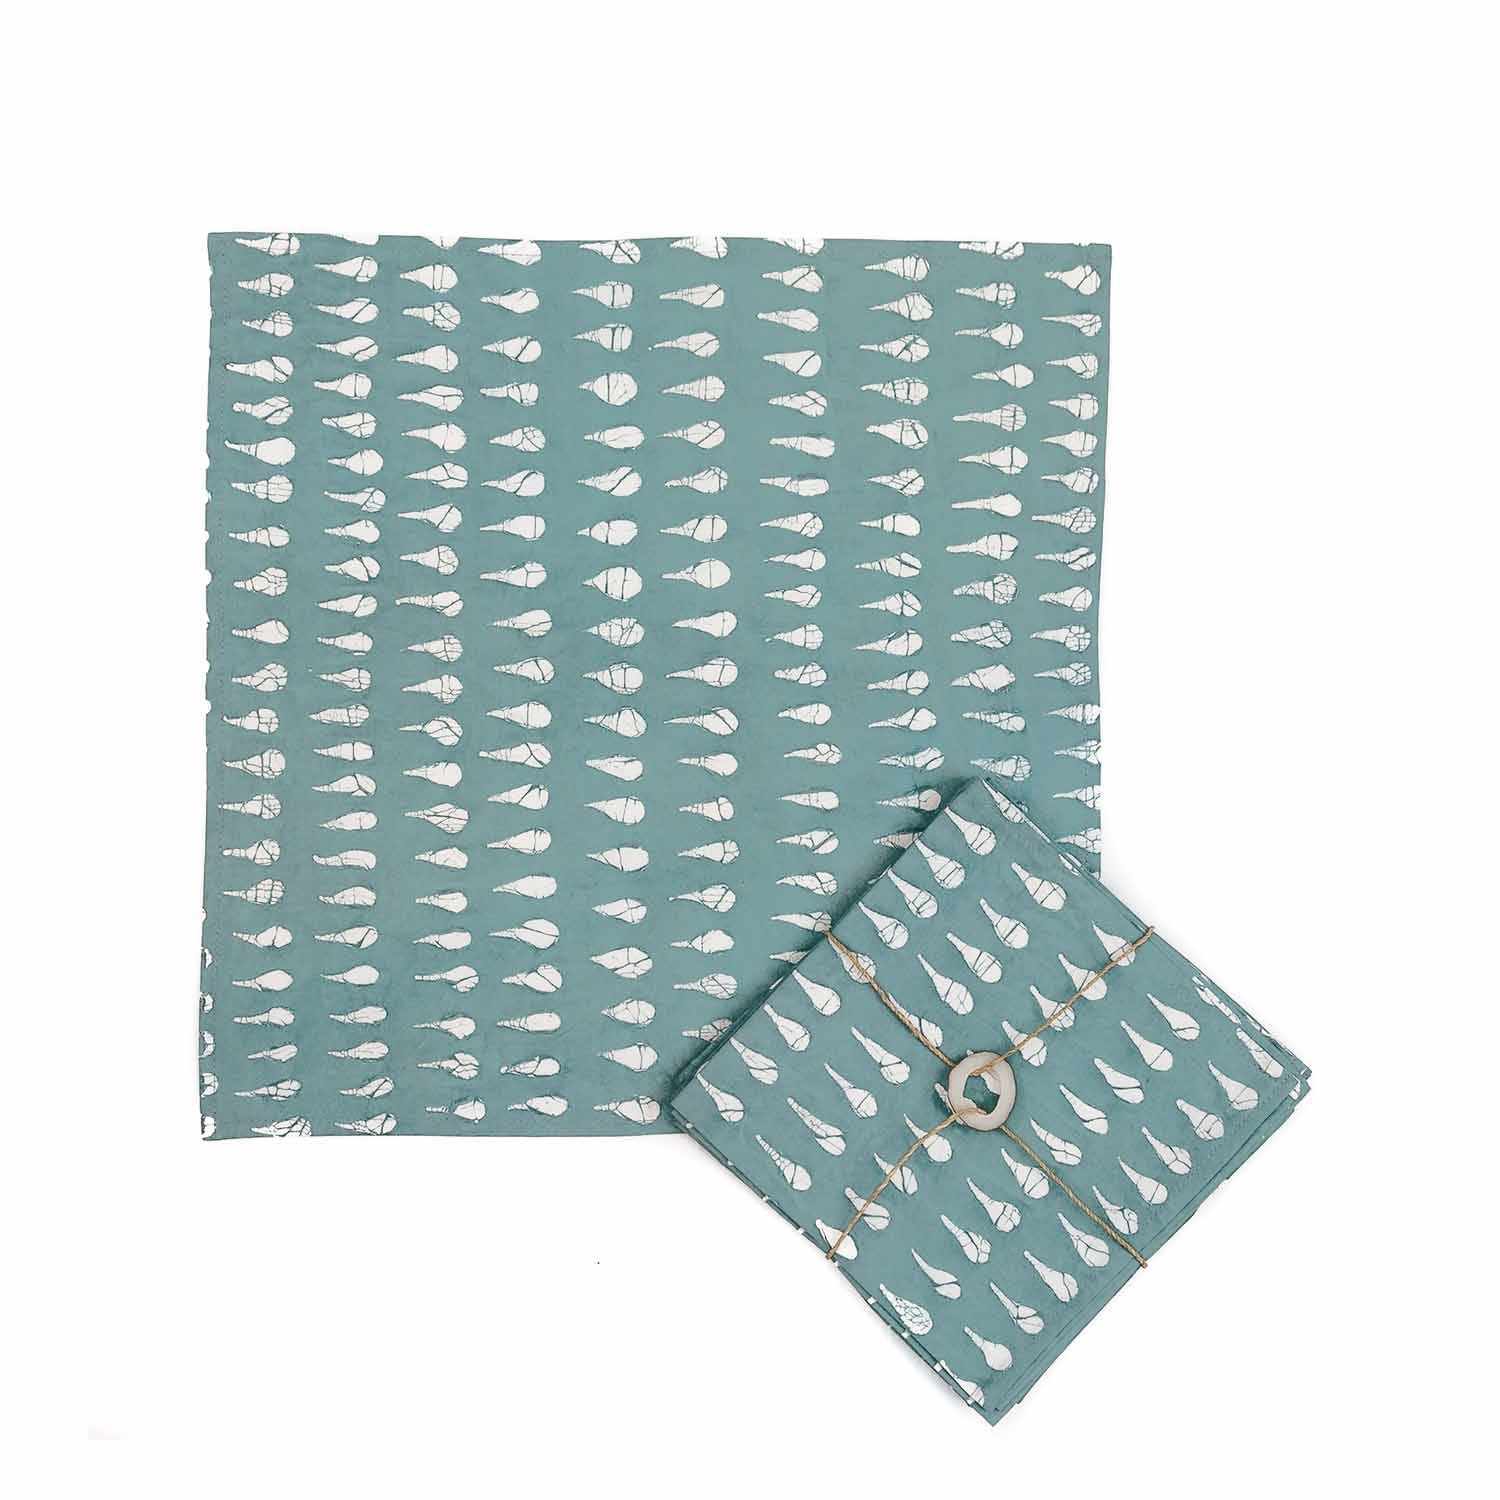 Boho Teal Napkins: Artful dining with Tribal Textiles.